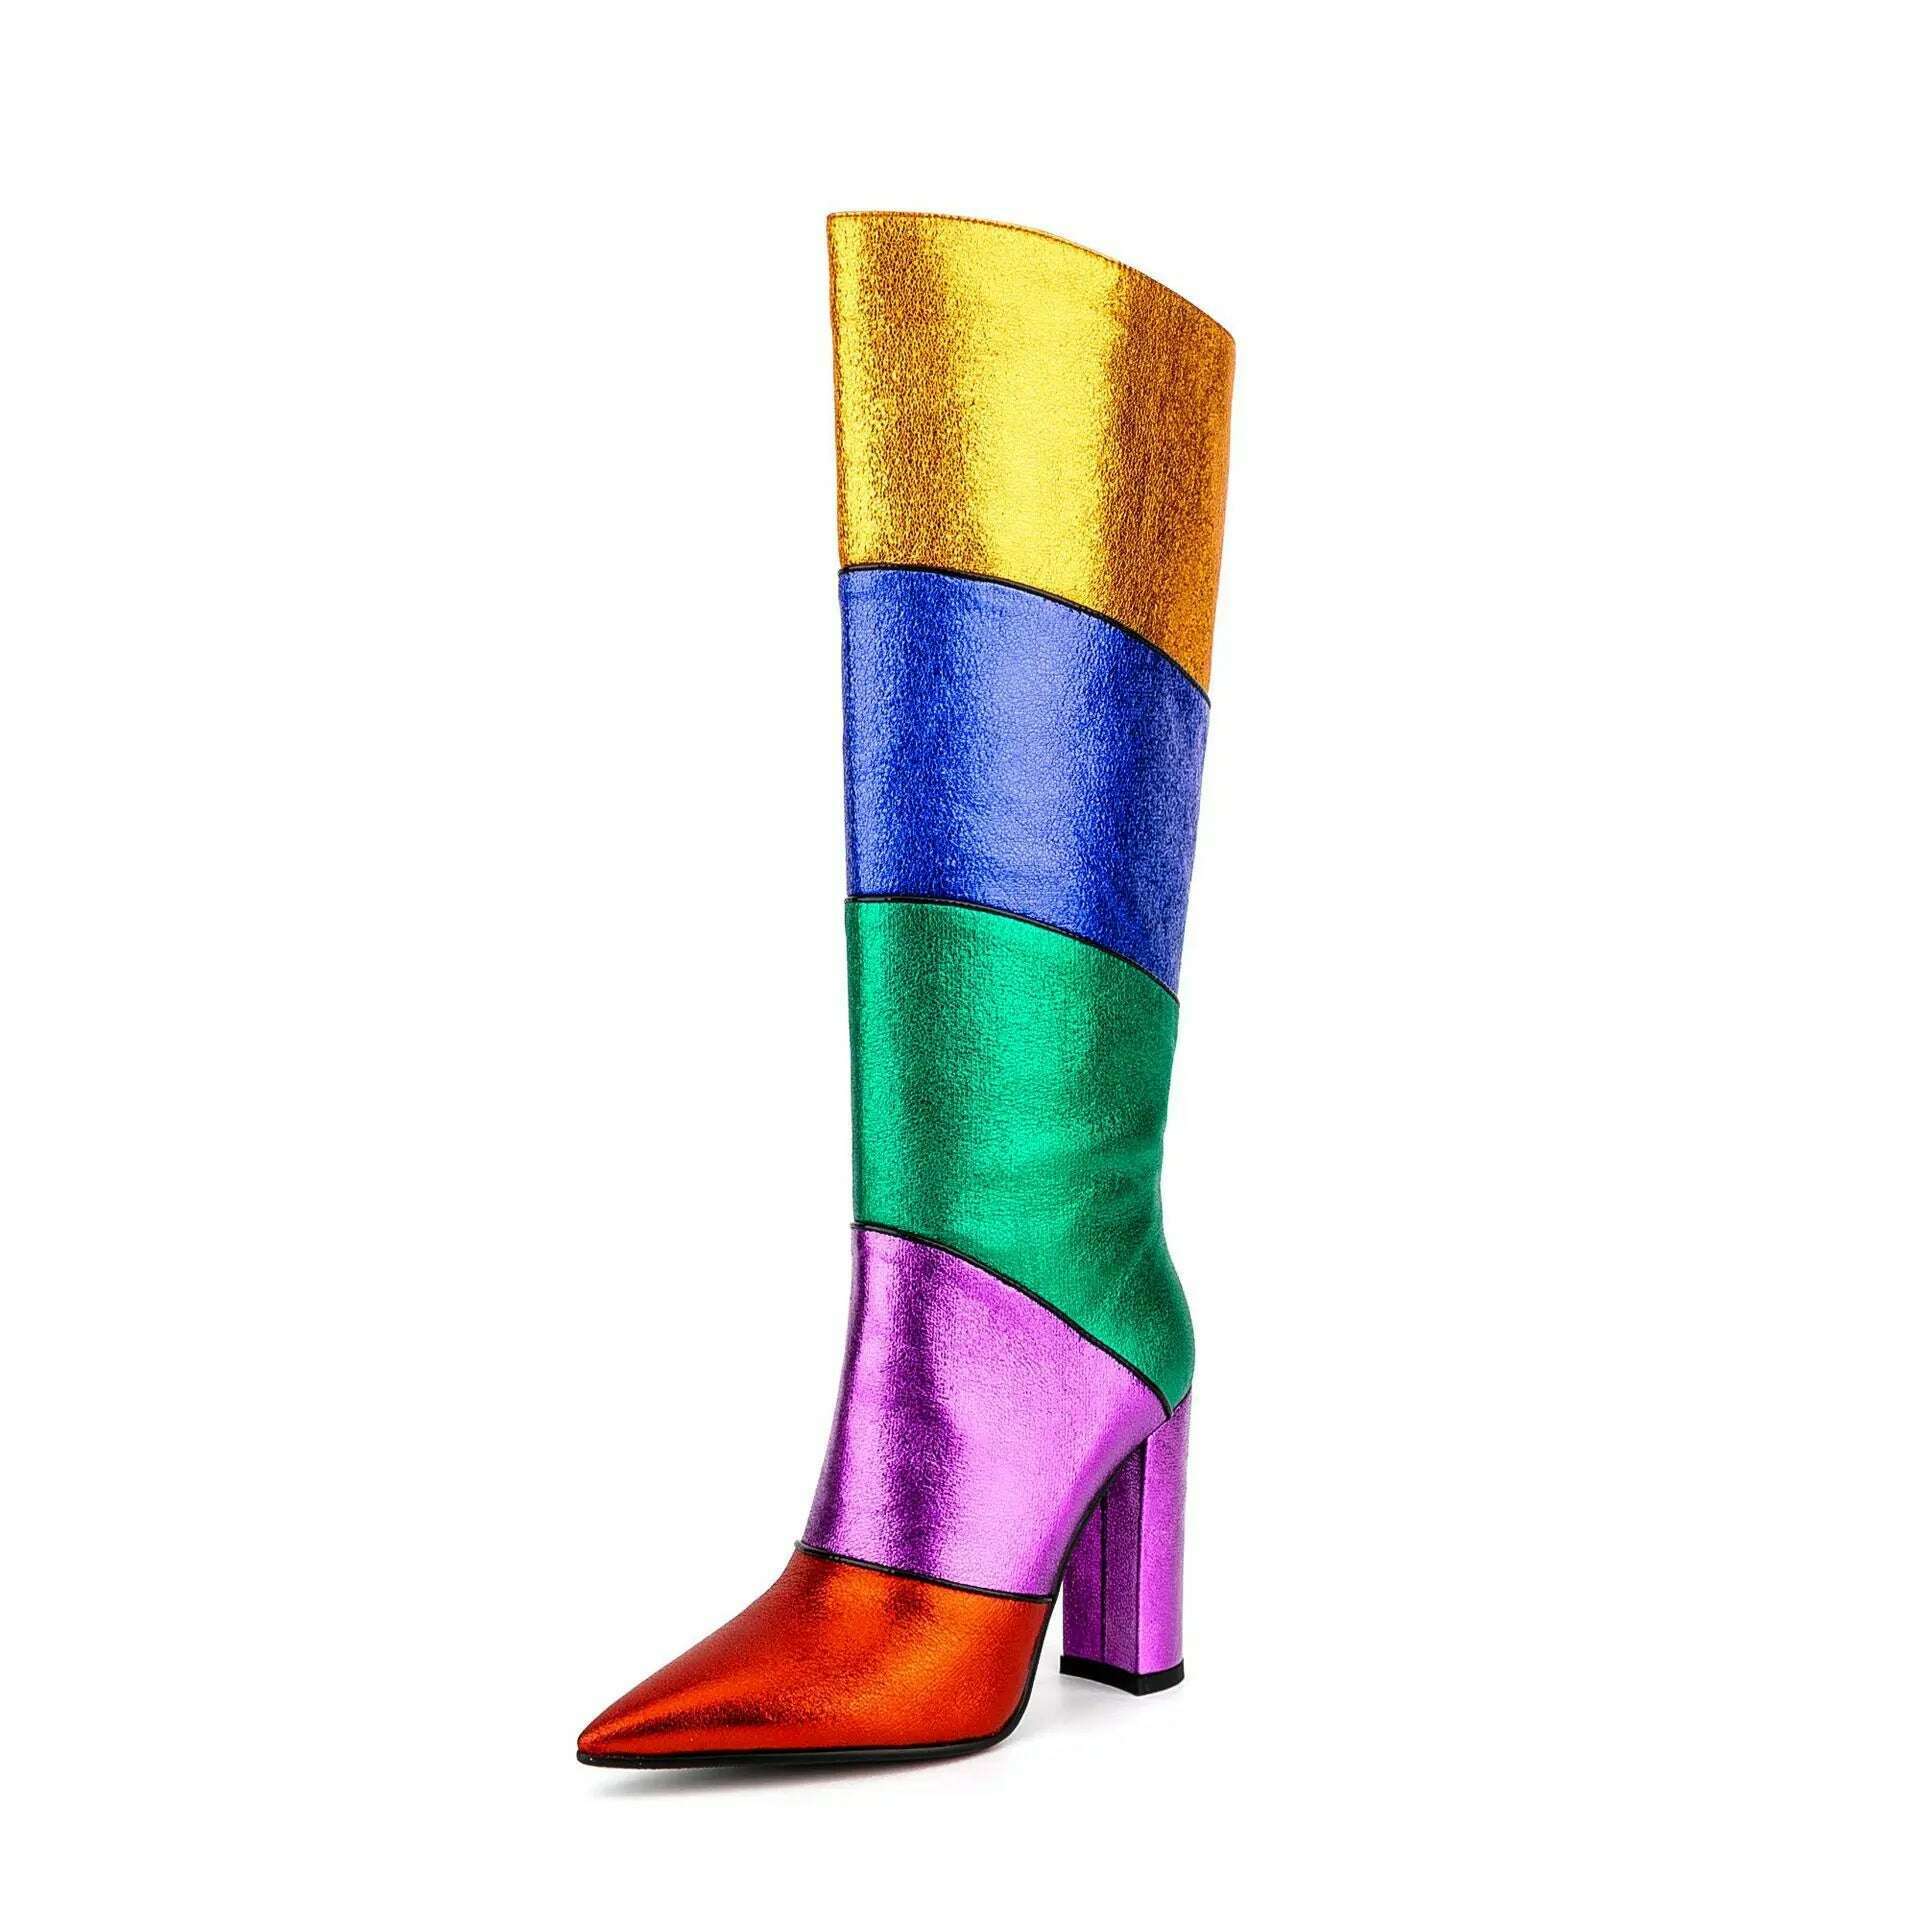 KIMLUD, Rainbow Colorful Pointed Toe Knee High Boots Block Heels Slip-Ob Mixed Color Sewing Spring Women Bright Shiny Leather Shoes, multi / 34 / China, KIMLUD Women's Clothes